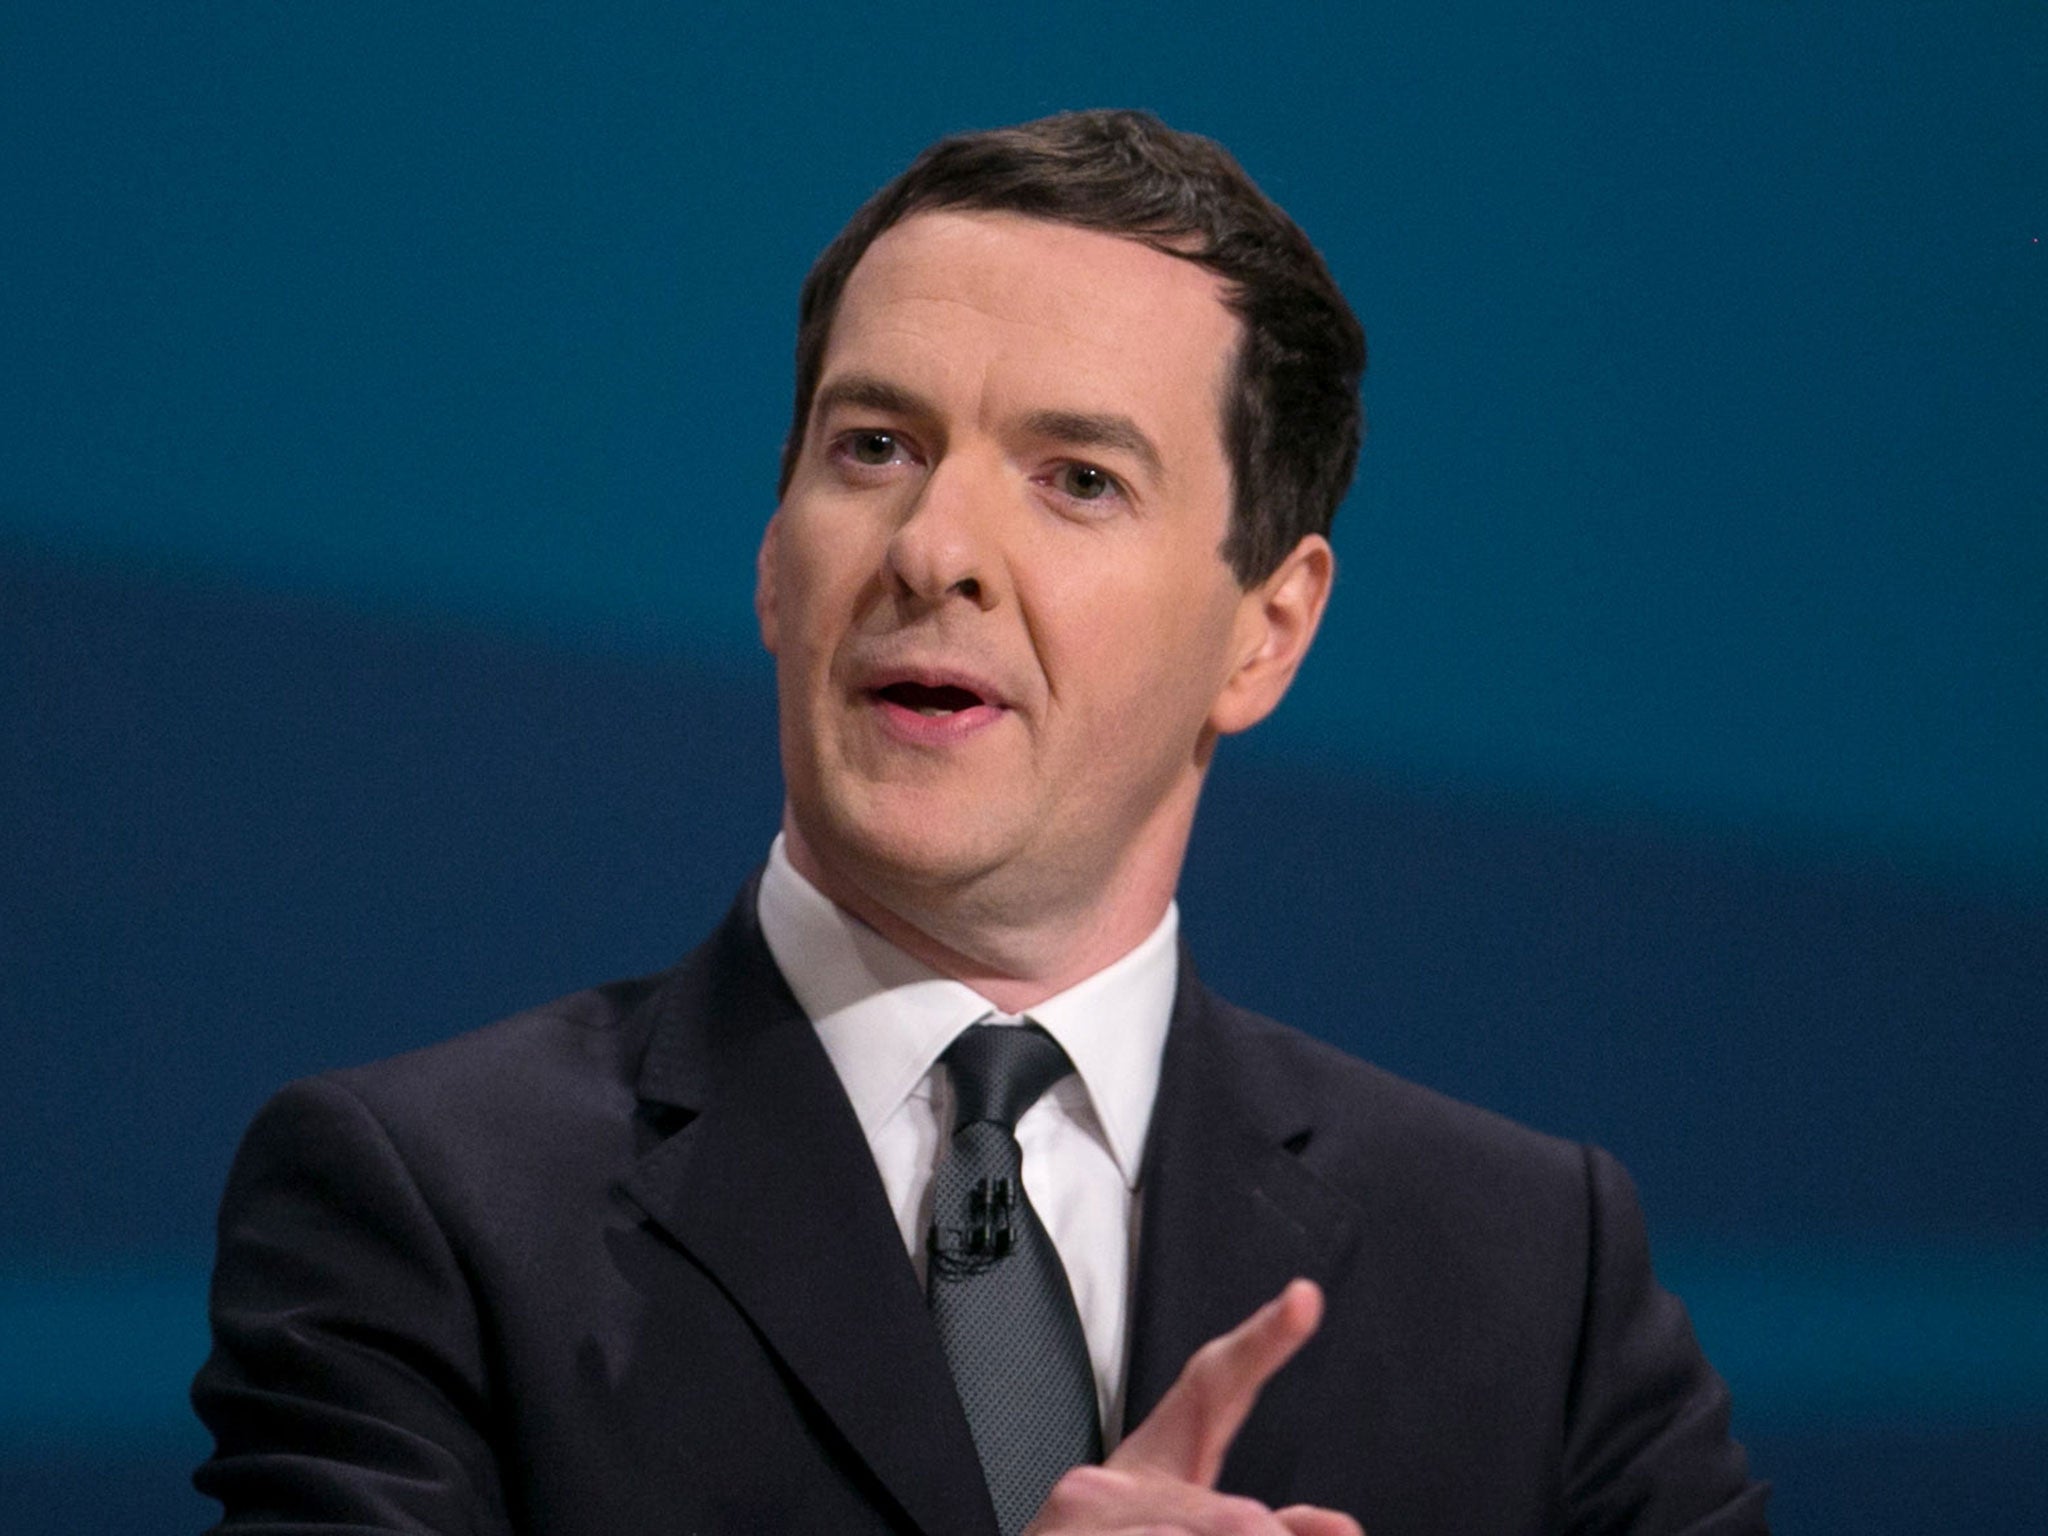 On 30 September, at the Tory conference in Birmingham, the Enterprise Forum hosted an invitation-only reception with the CBI and George Osborne